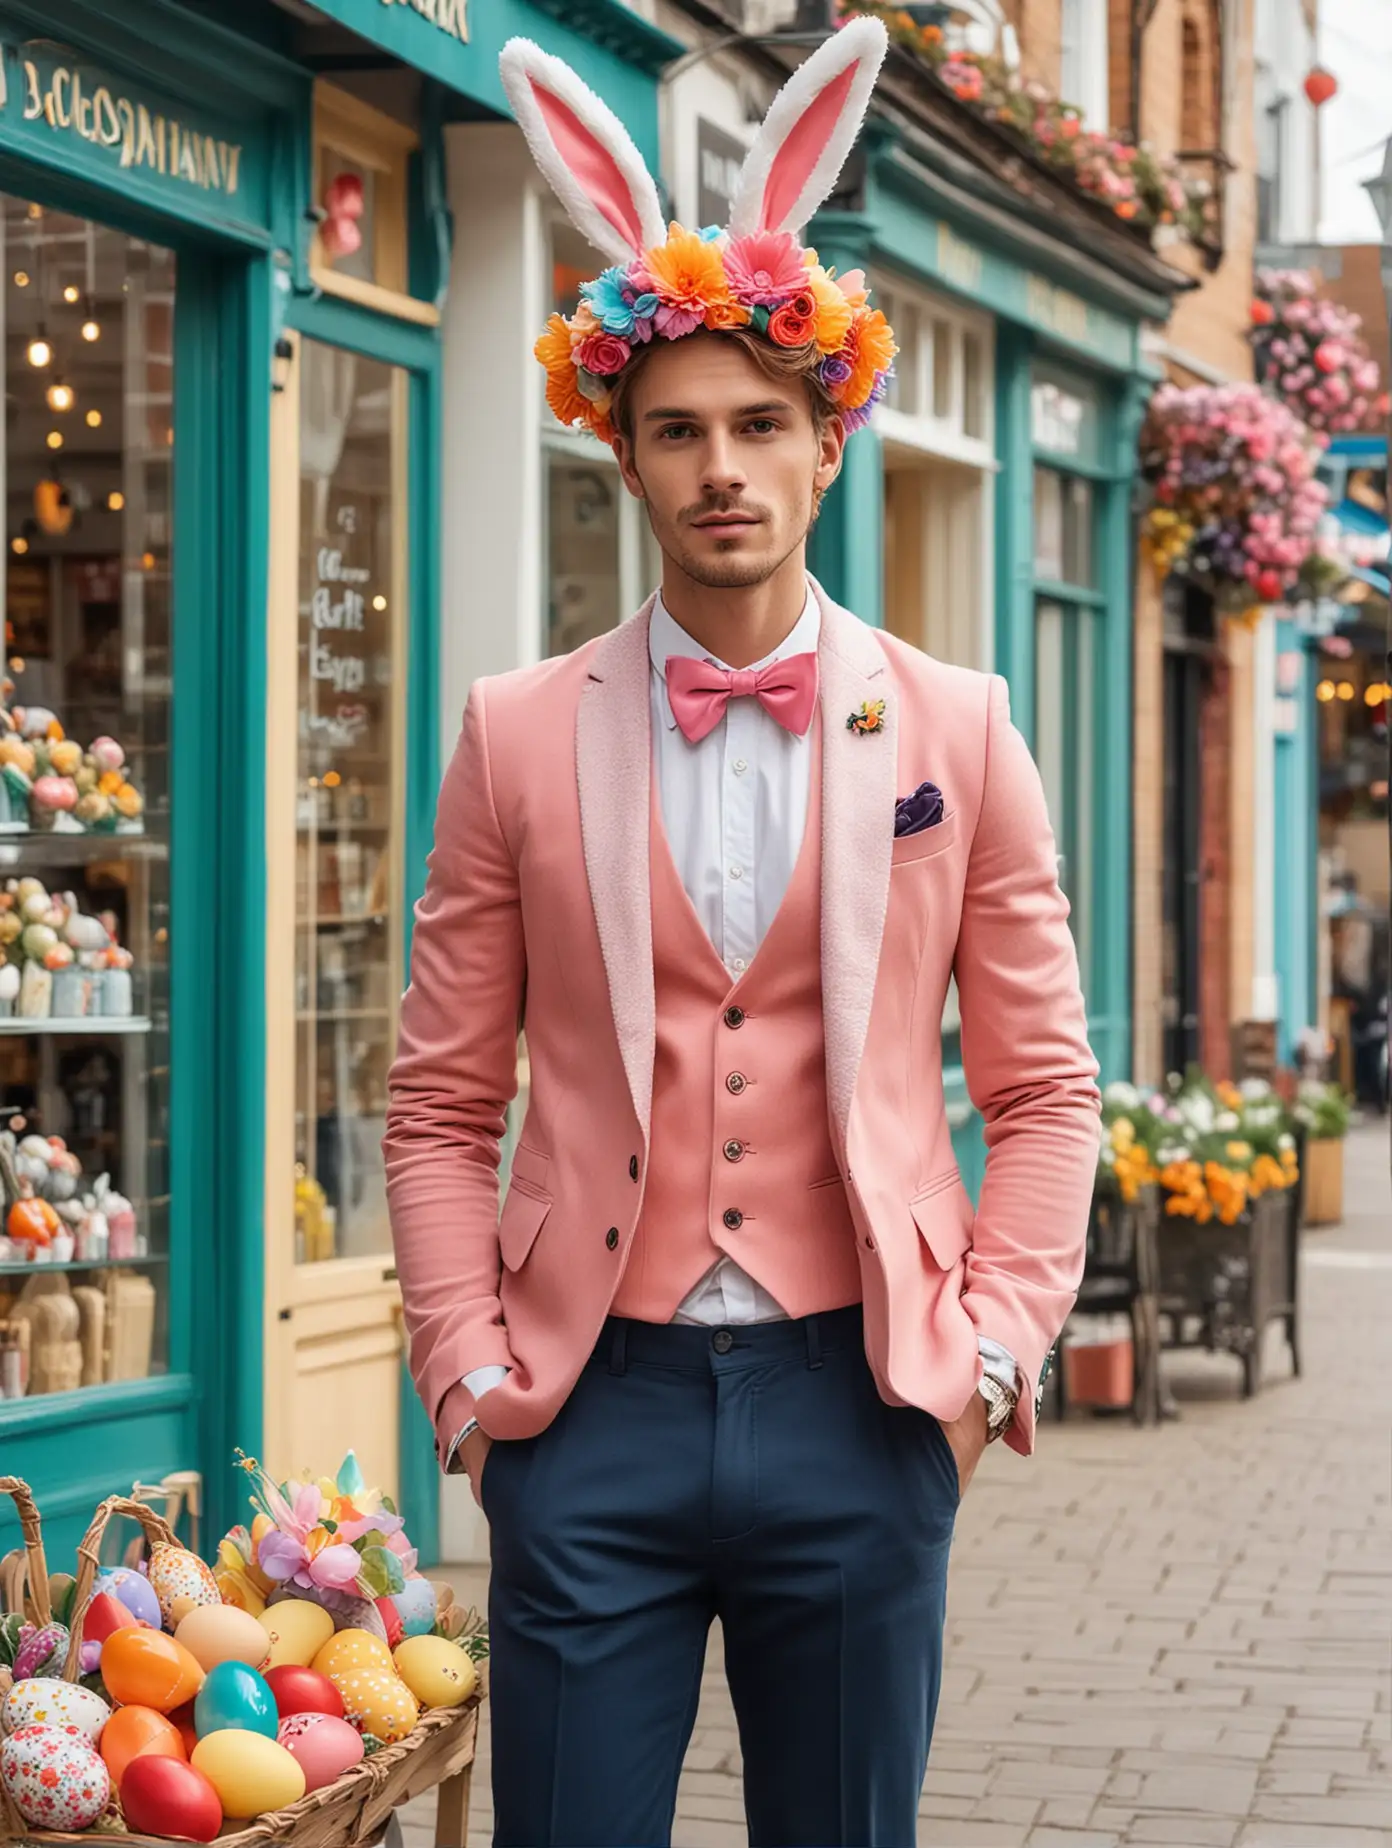 Stylish British Man with BunnyInspired Fashion in Vibrant Easter Setting